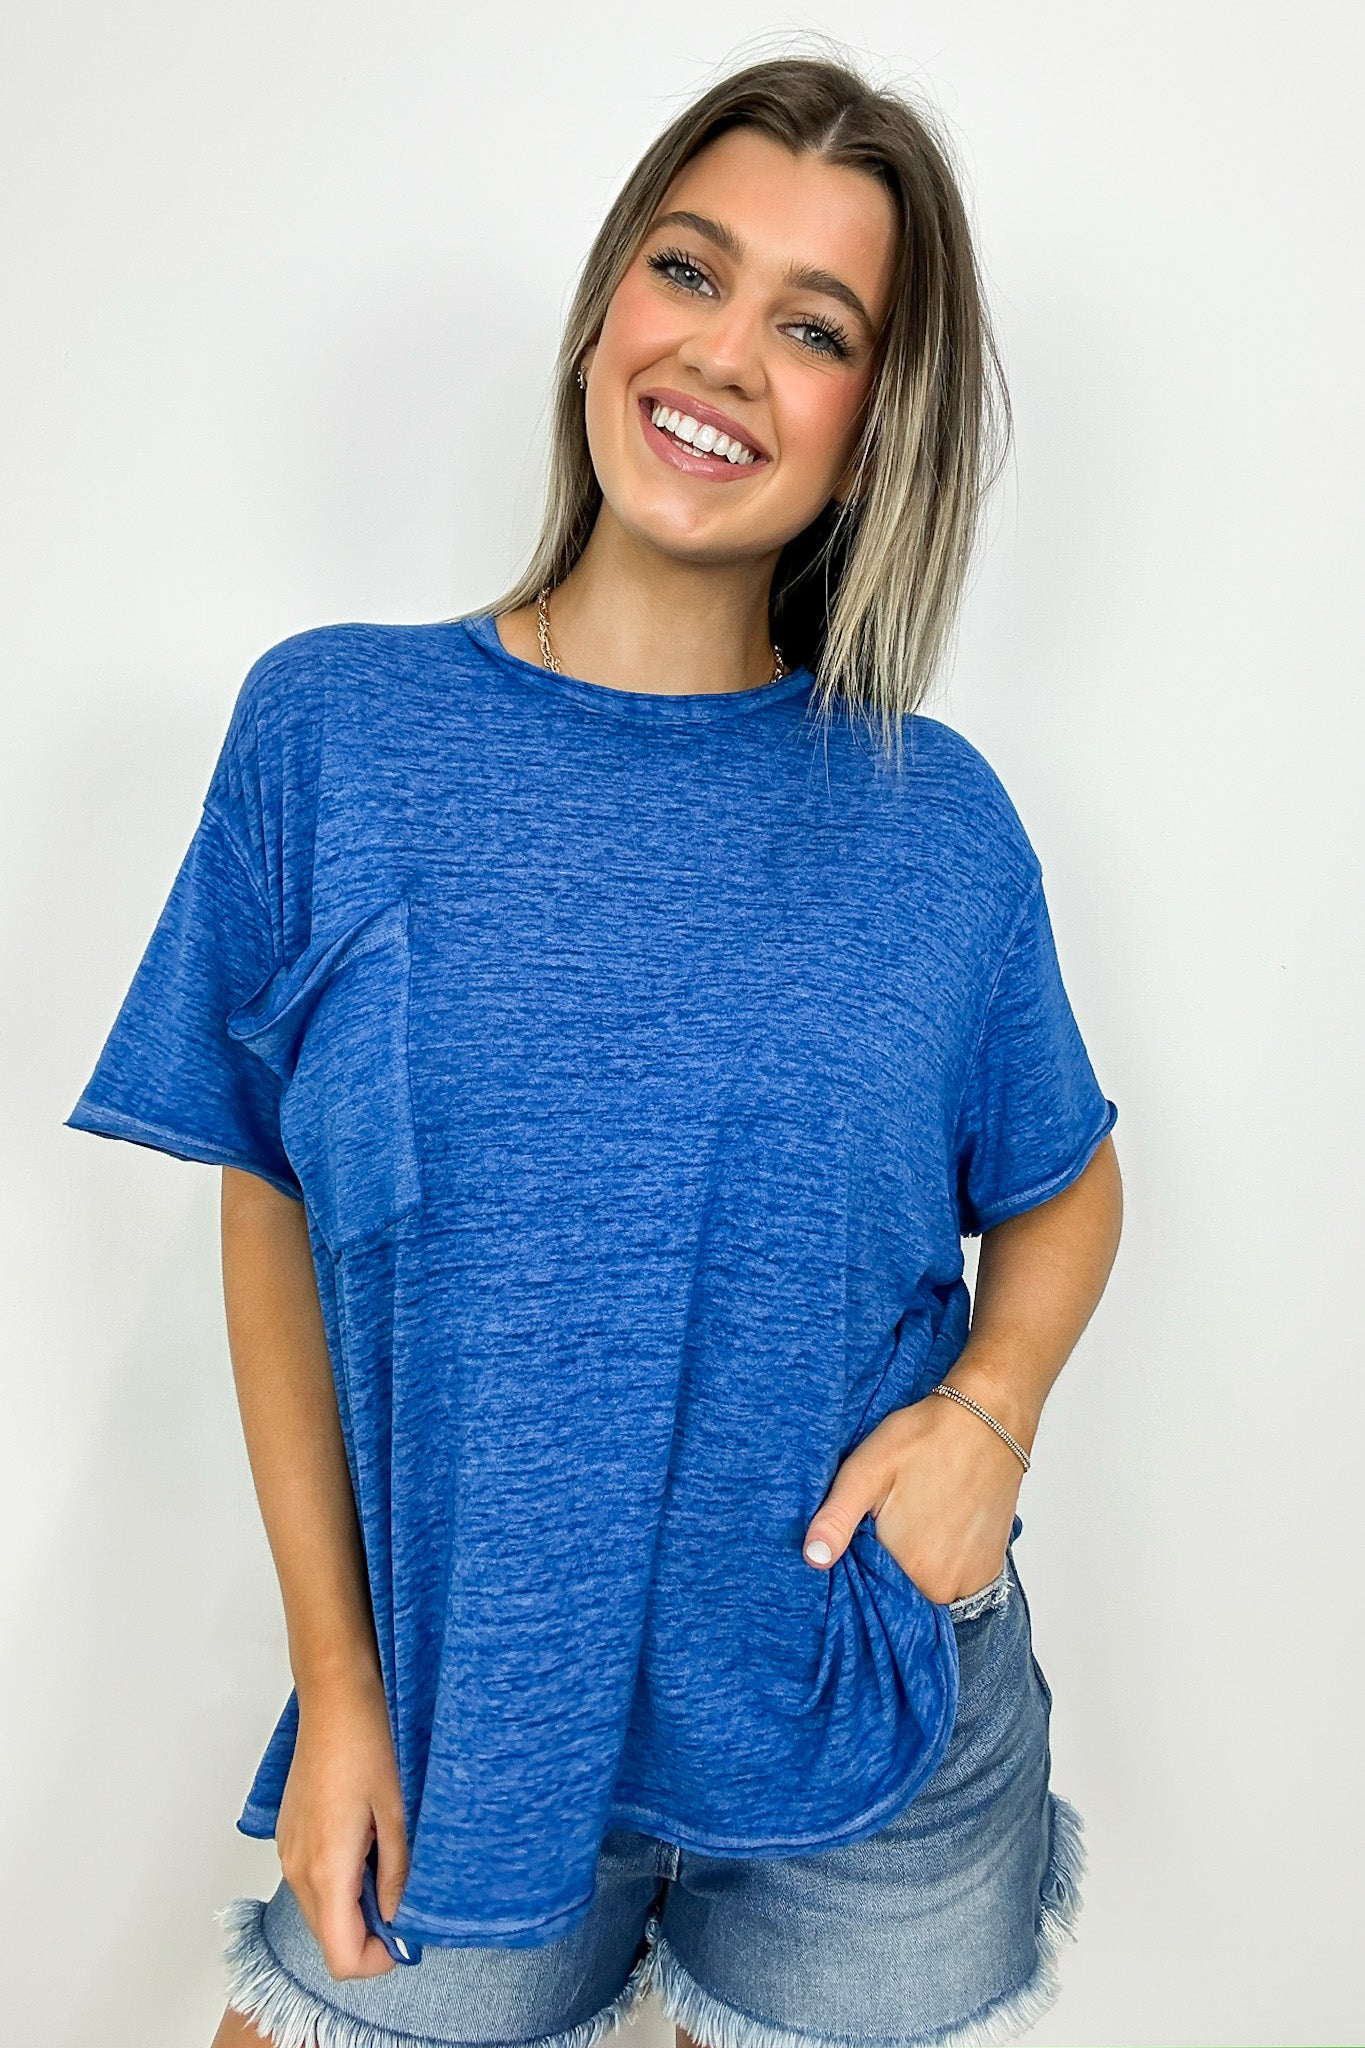 Classic Blue / SM Marisol Burnout Wash Oversized Pocket Top - Madison and Mallory